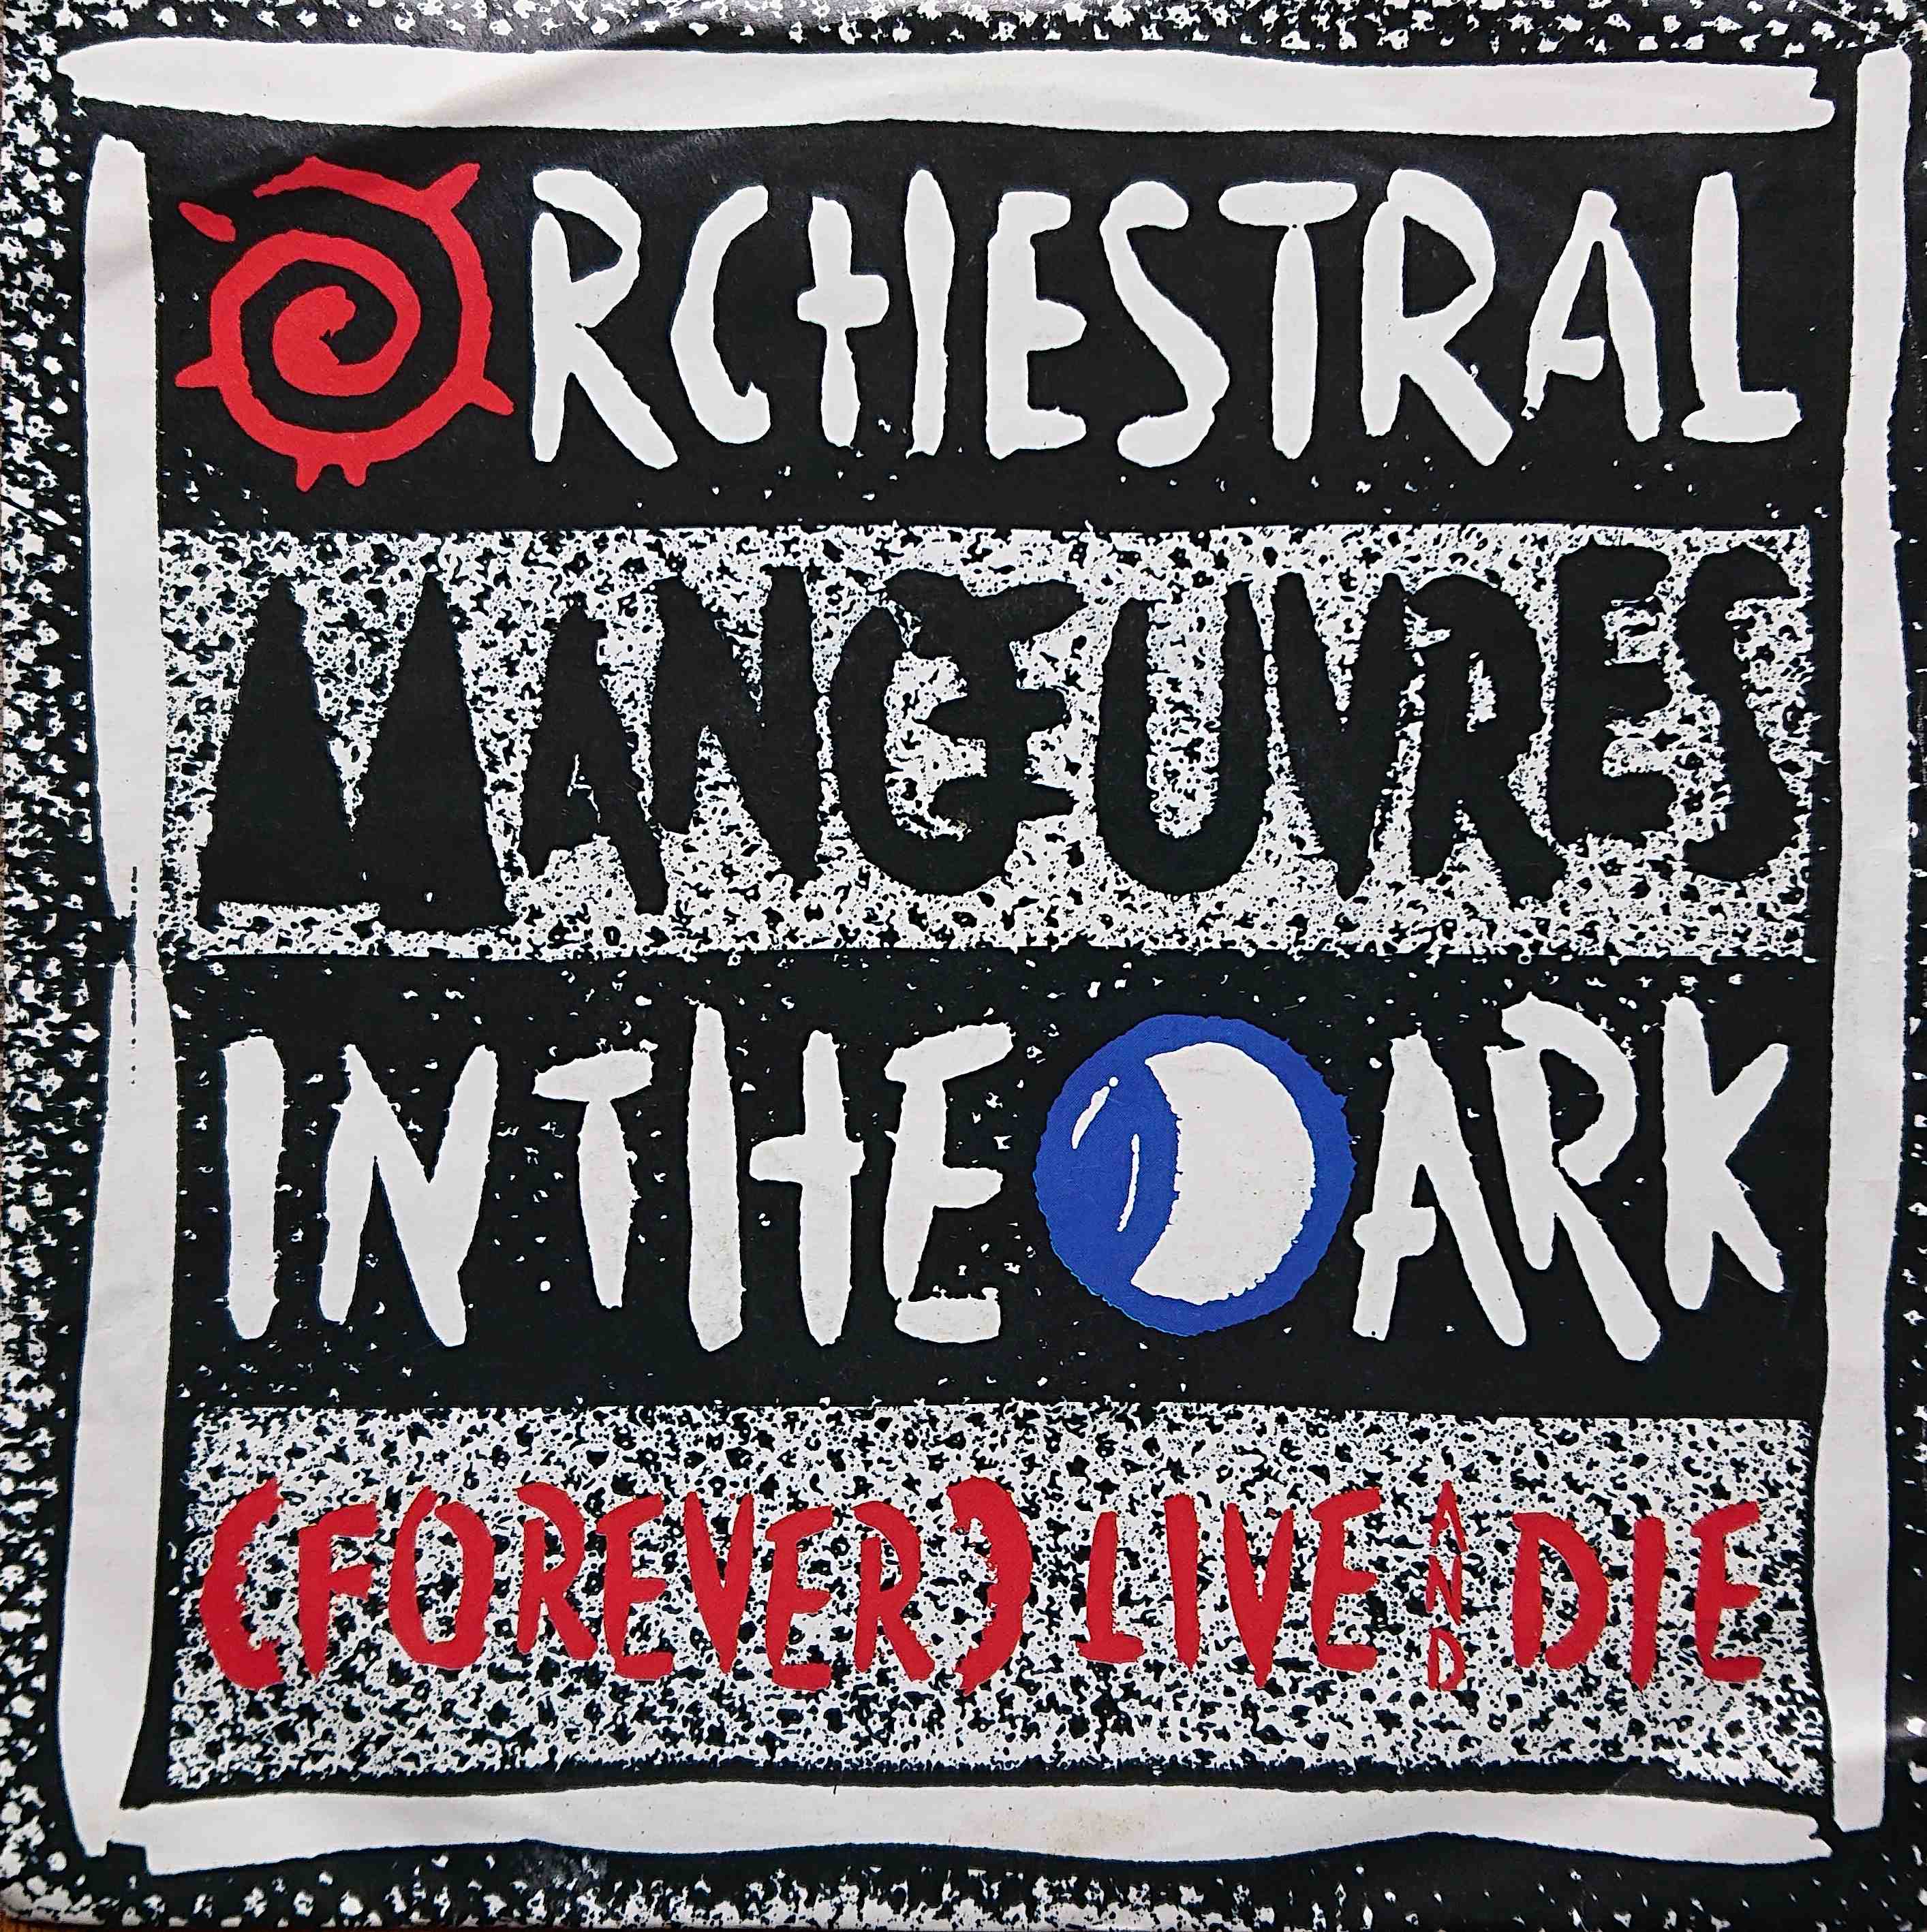 Picture of VS 888 (Forever) Live and die by artist OMD